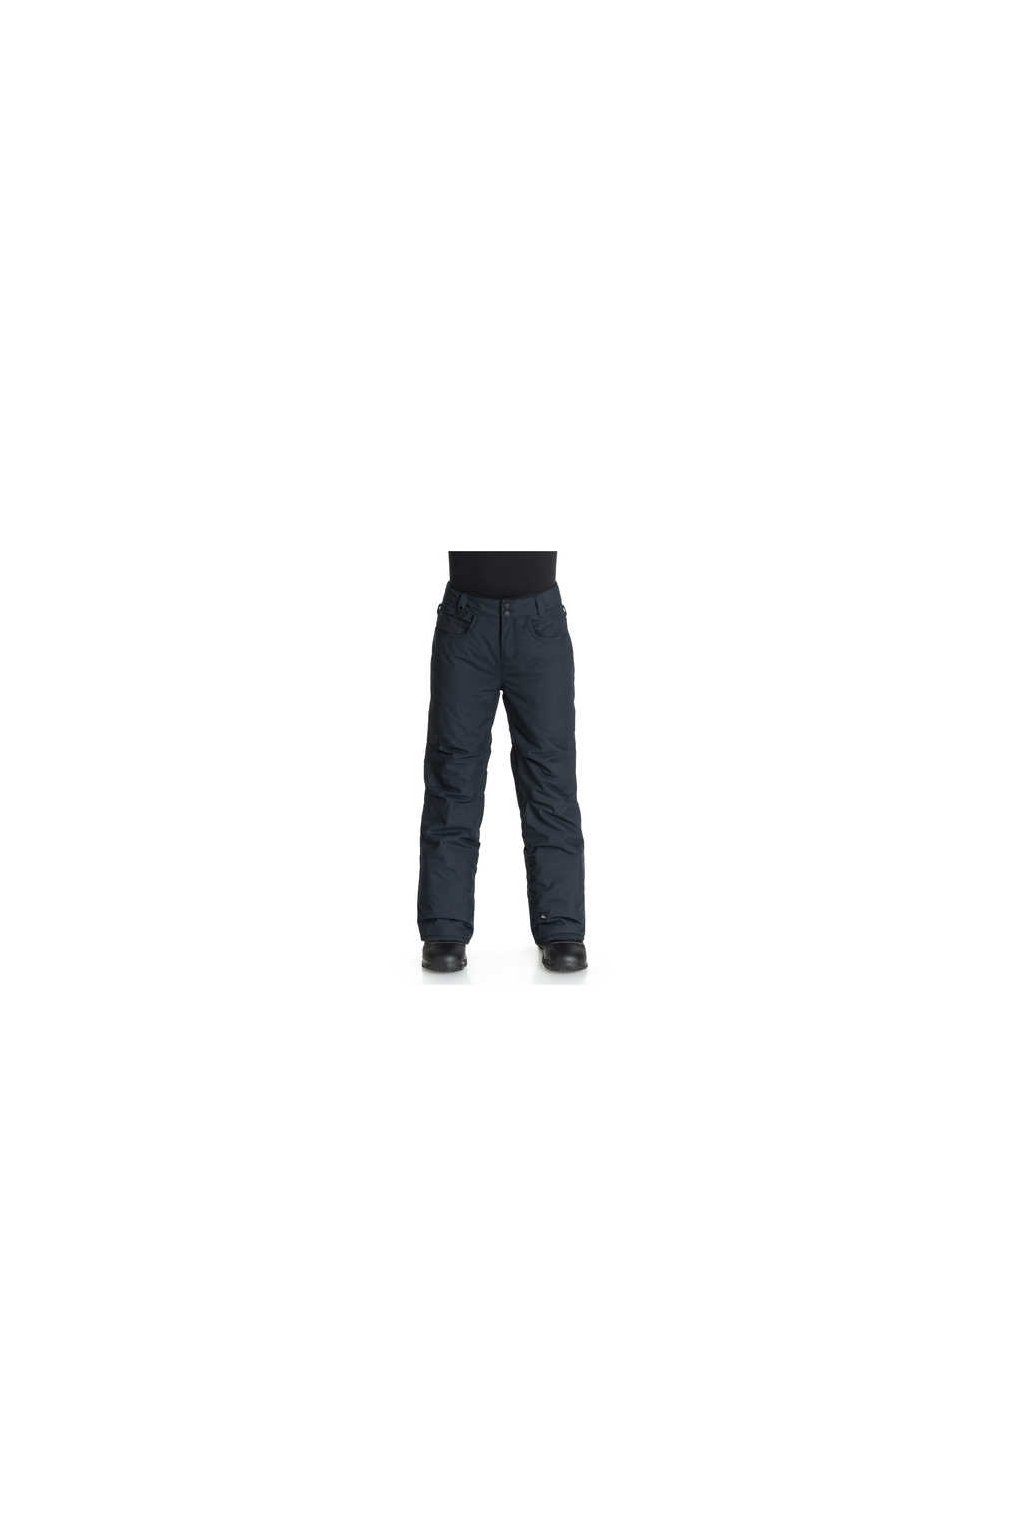 Quiksilver - nohavice OT State Yth Pant B anthracite